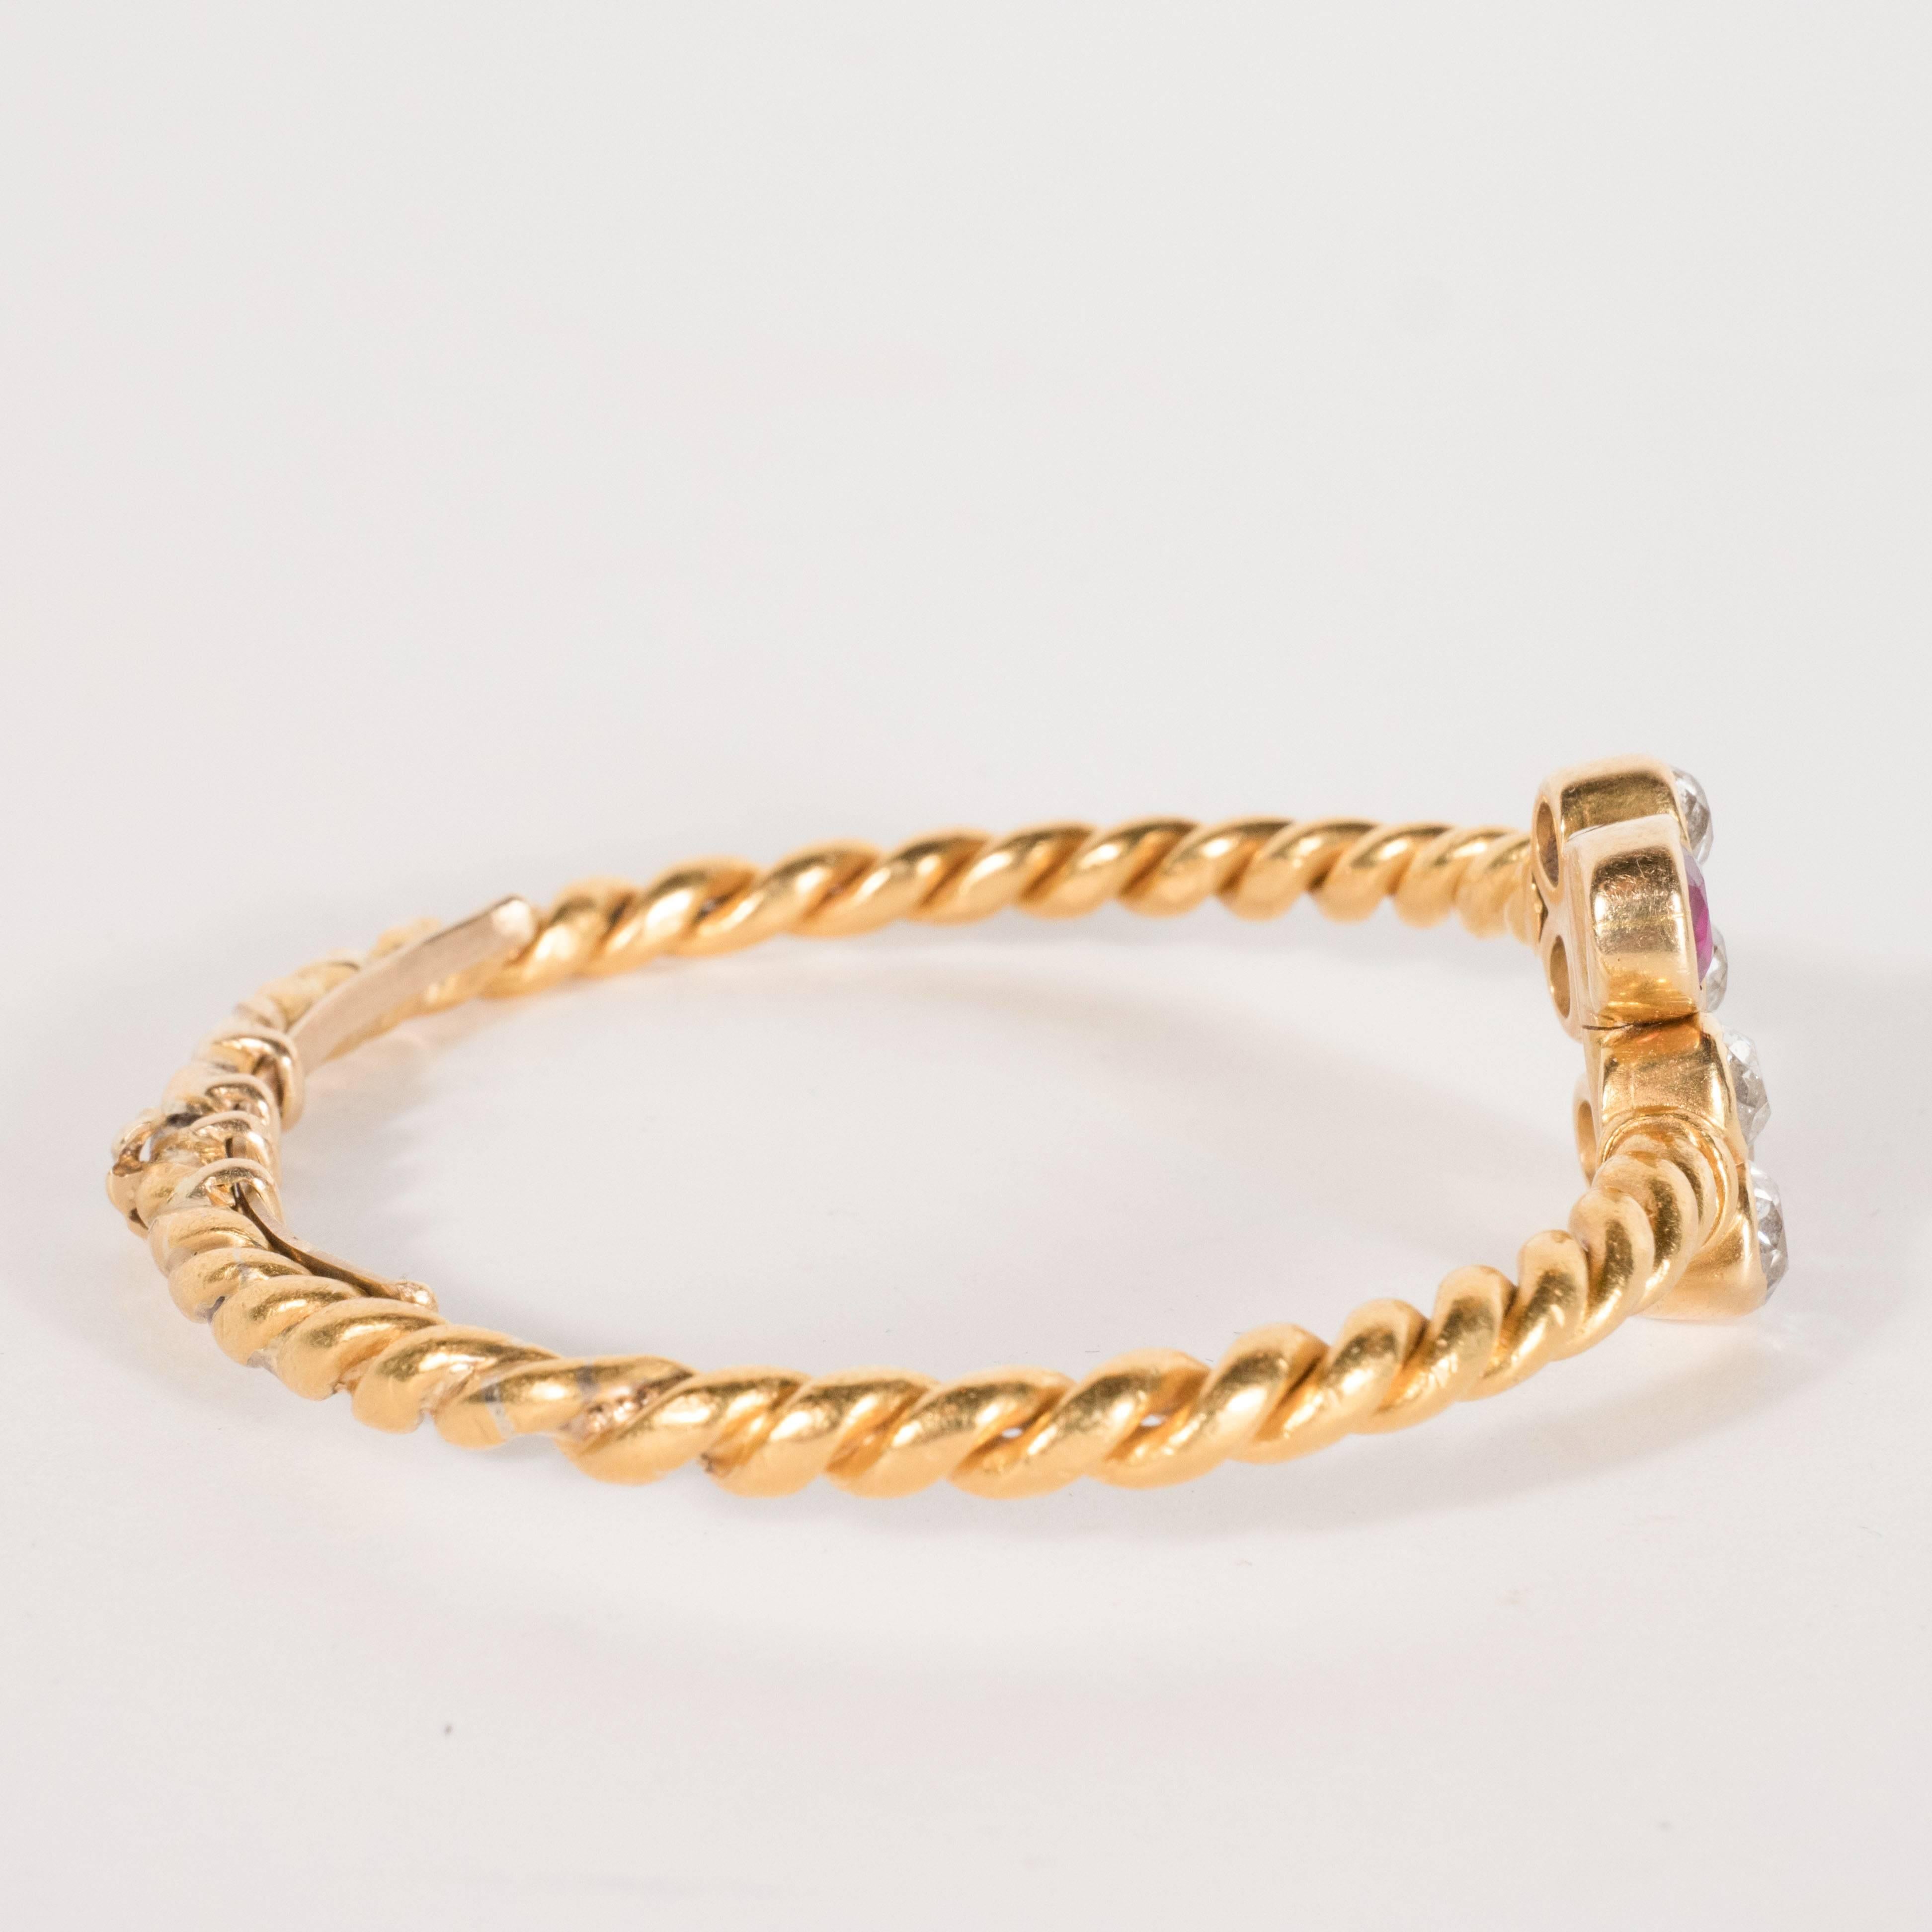 Hand-Wrought 18 Karat Bangle Bracelet with Ruby and Old European Cut Diamonds 3